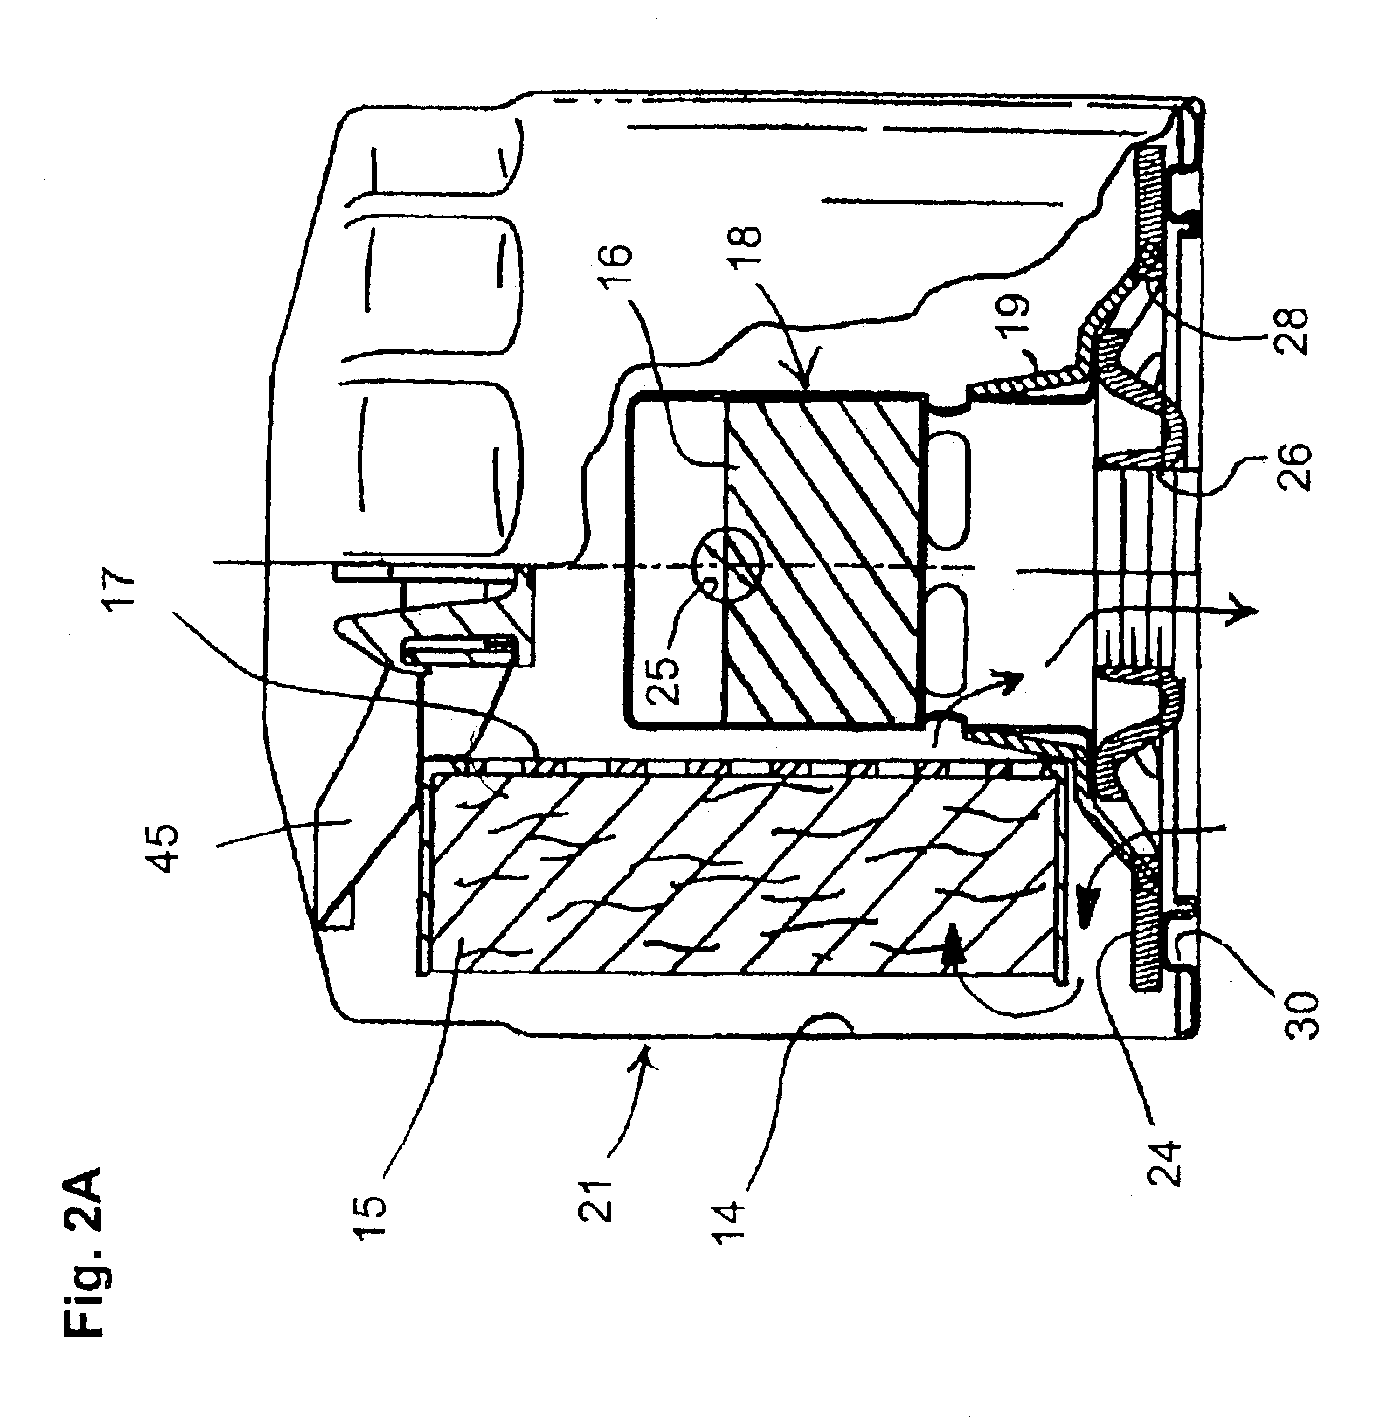 Additive dispensing cartridge for an oil filter, and oil filter incorporating same